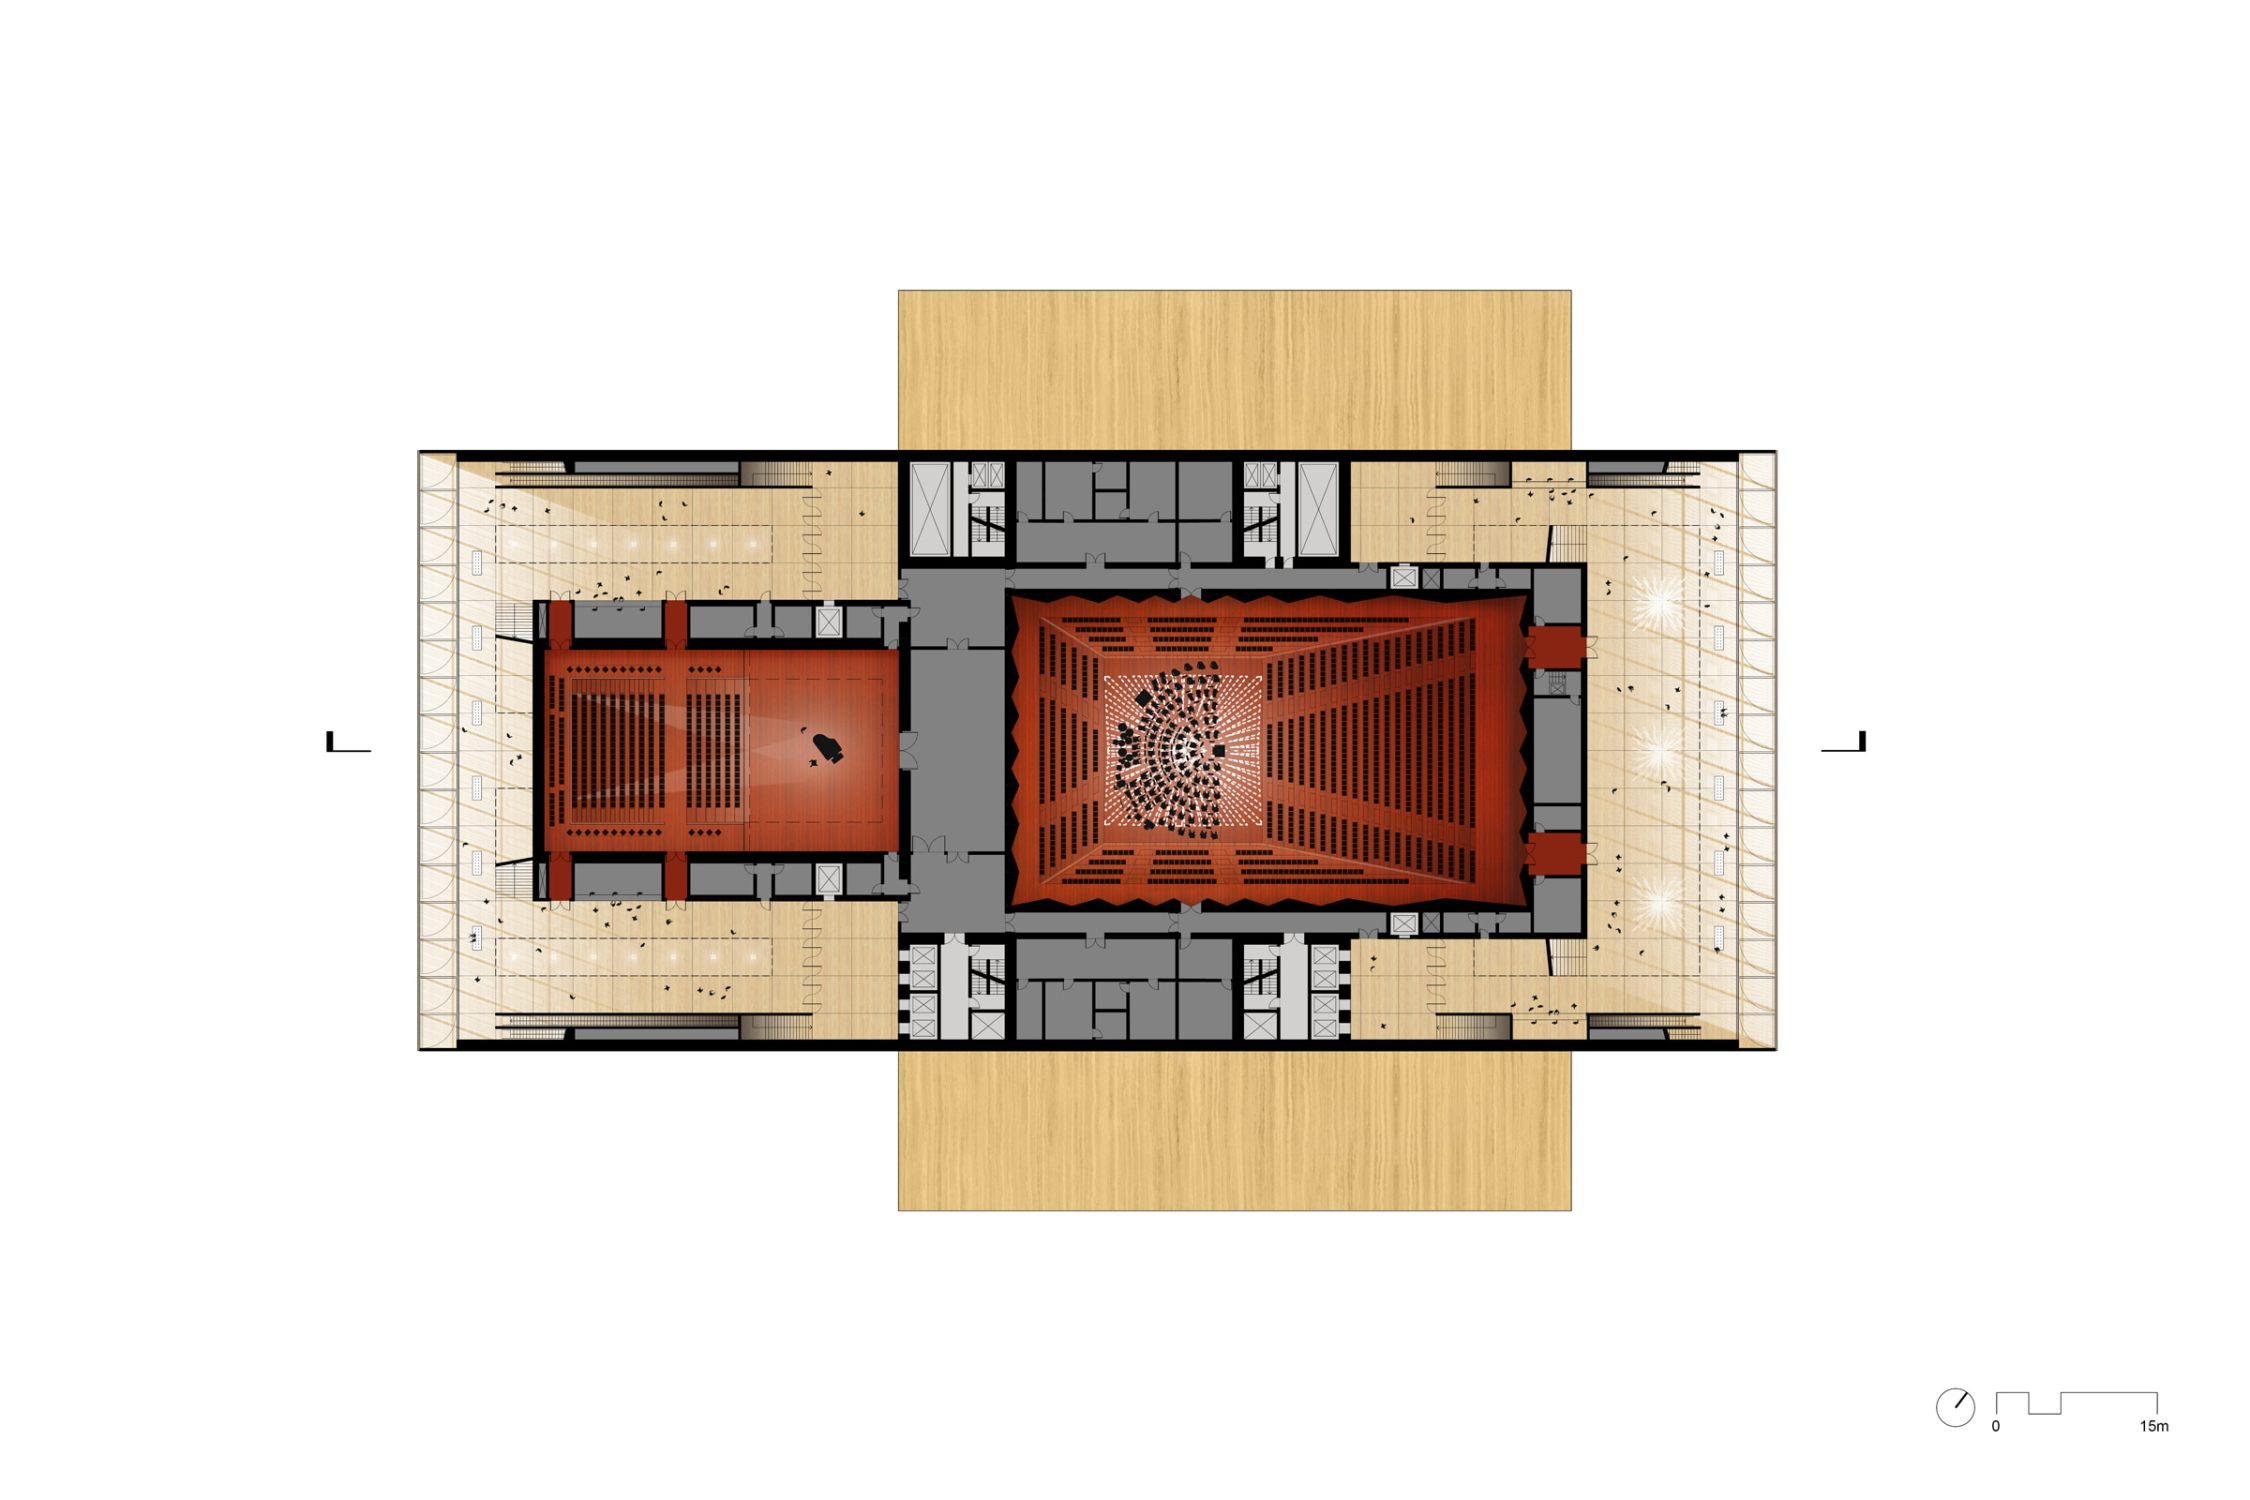 A floor plan of Shenzhen Opera House's Concert Hall and Multifunctional Theater.